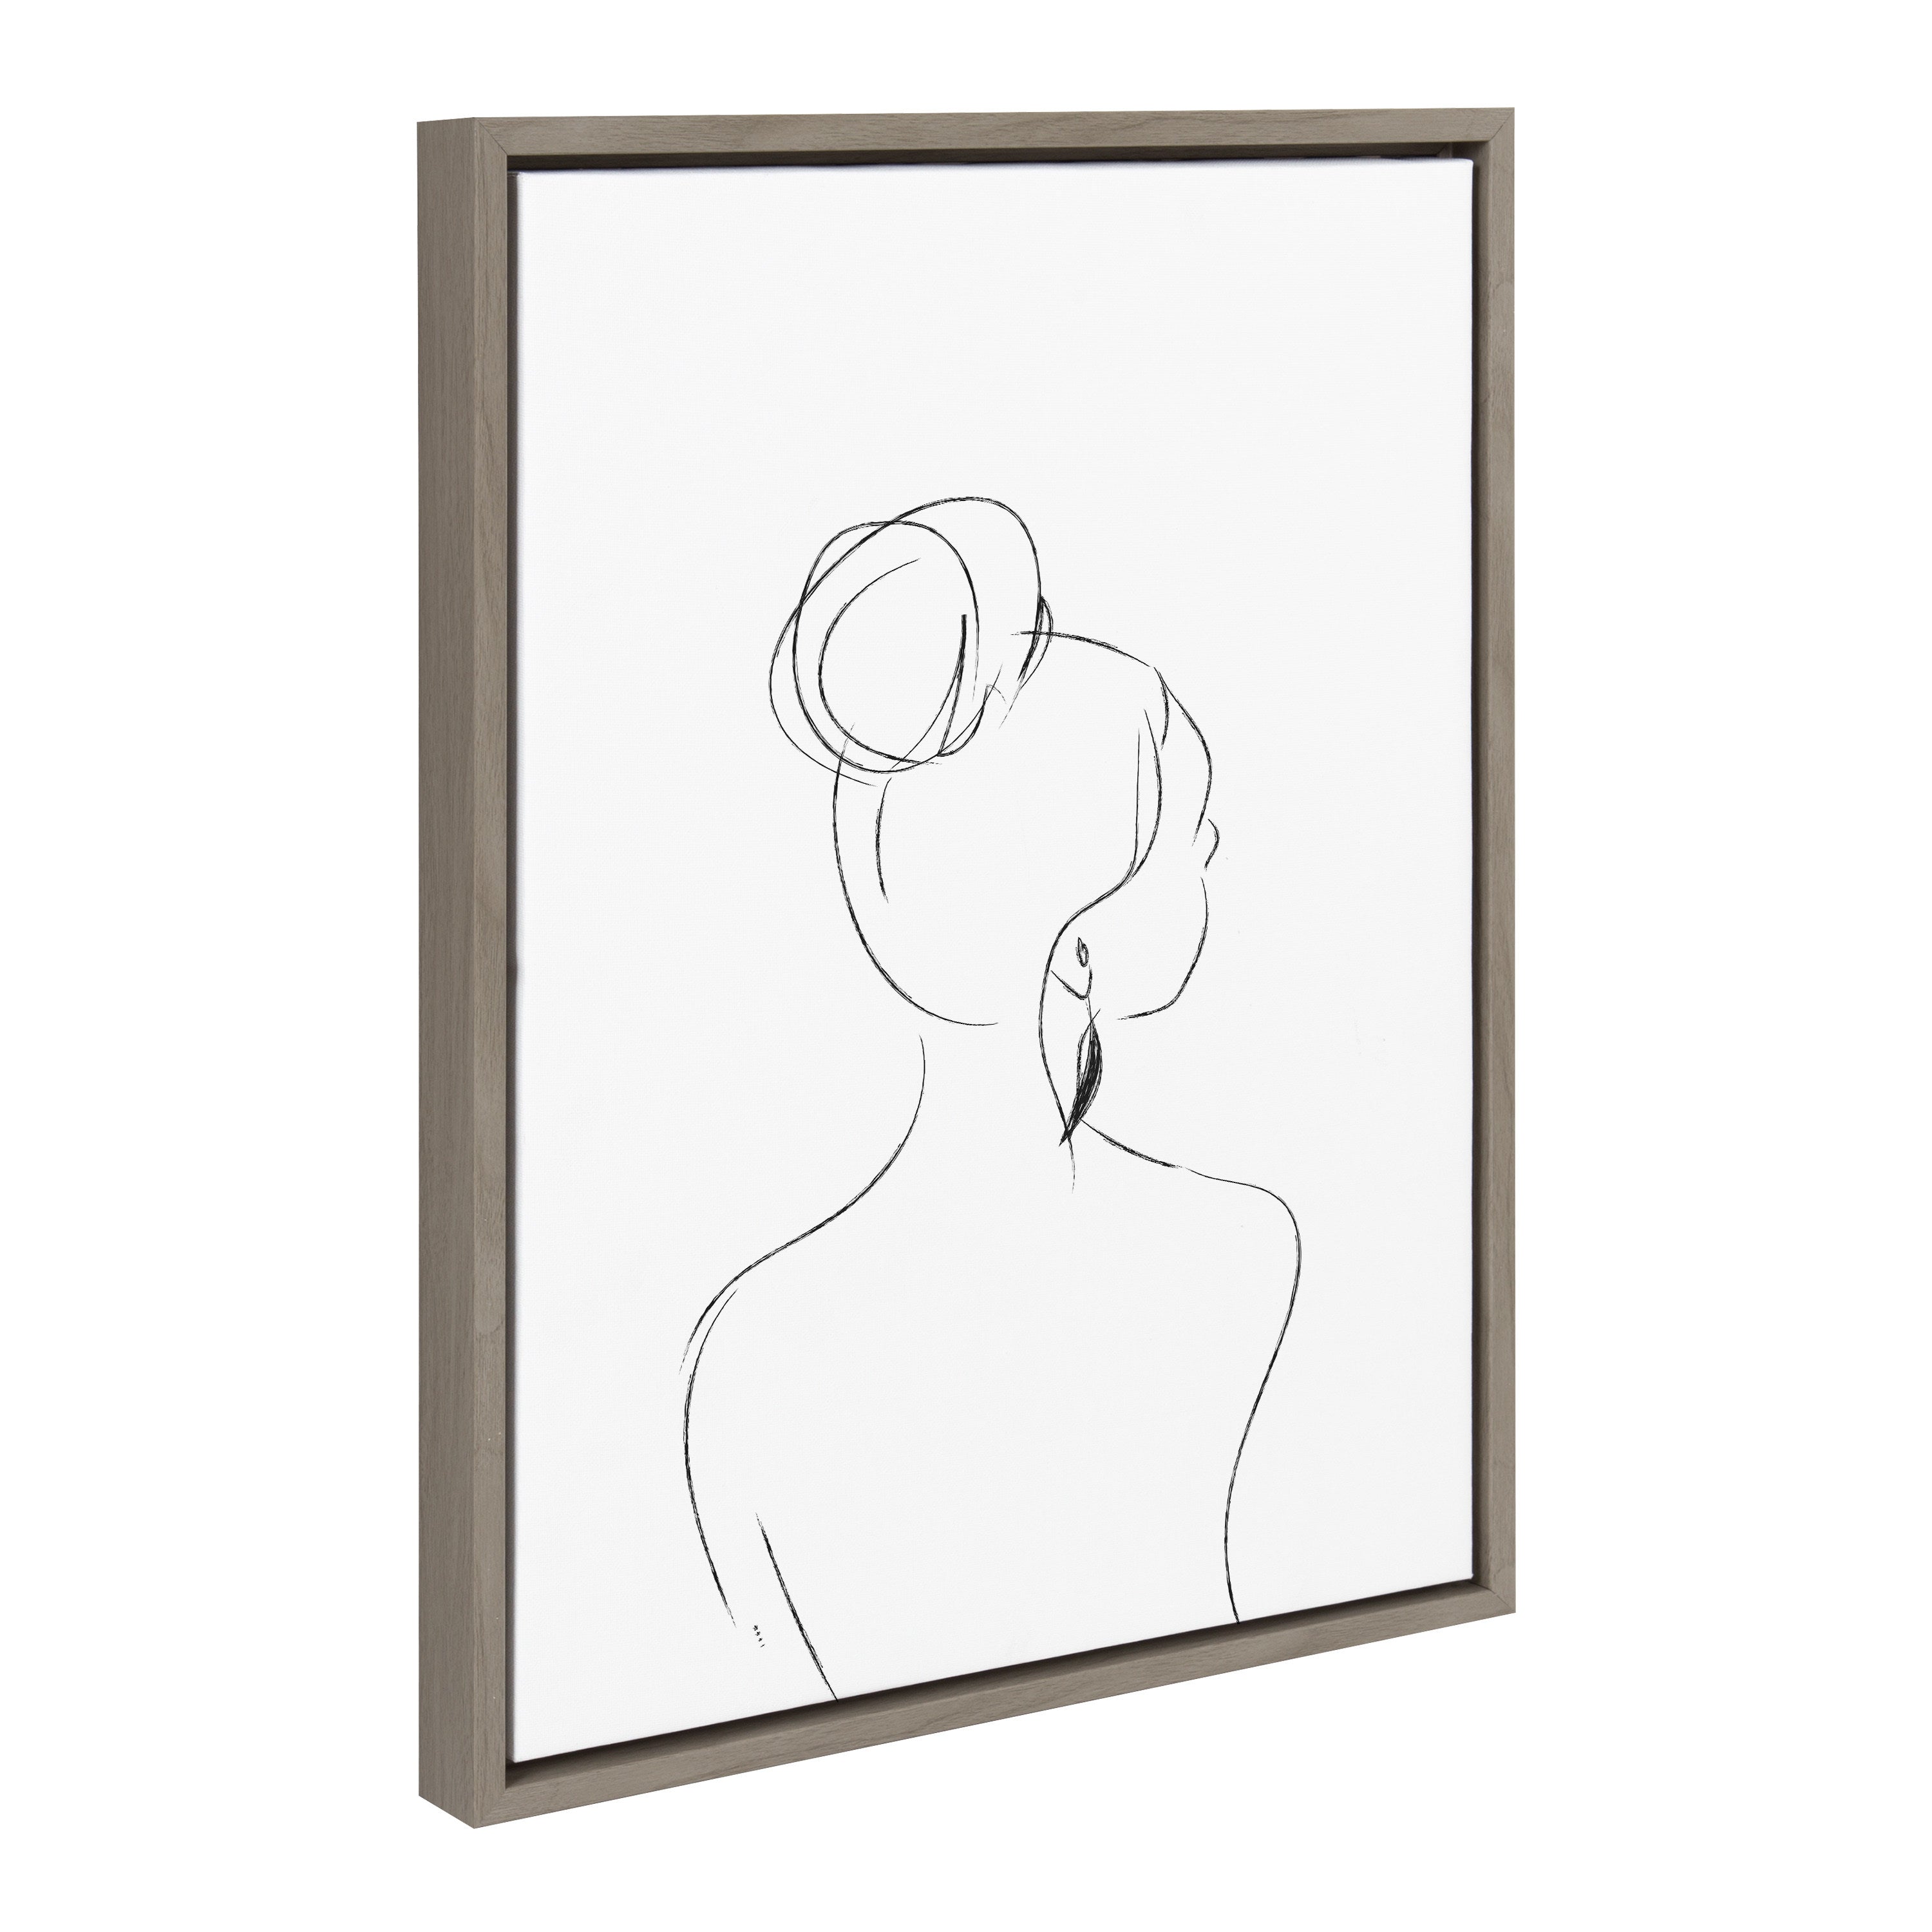 Sylvie Minimalist Woman 2 Framed Canvas by Teju Reval of SnazzyHues